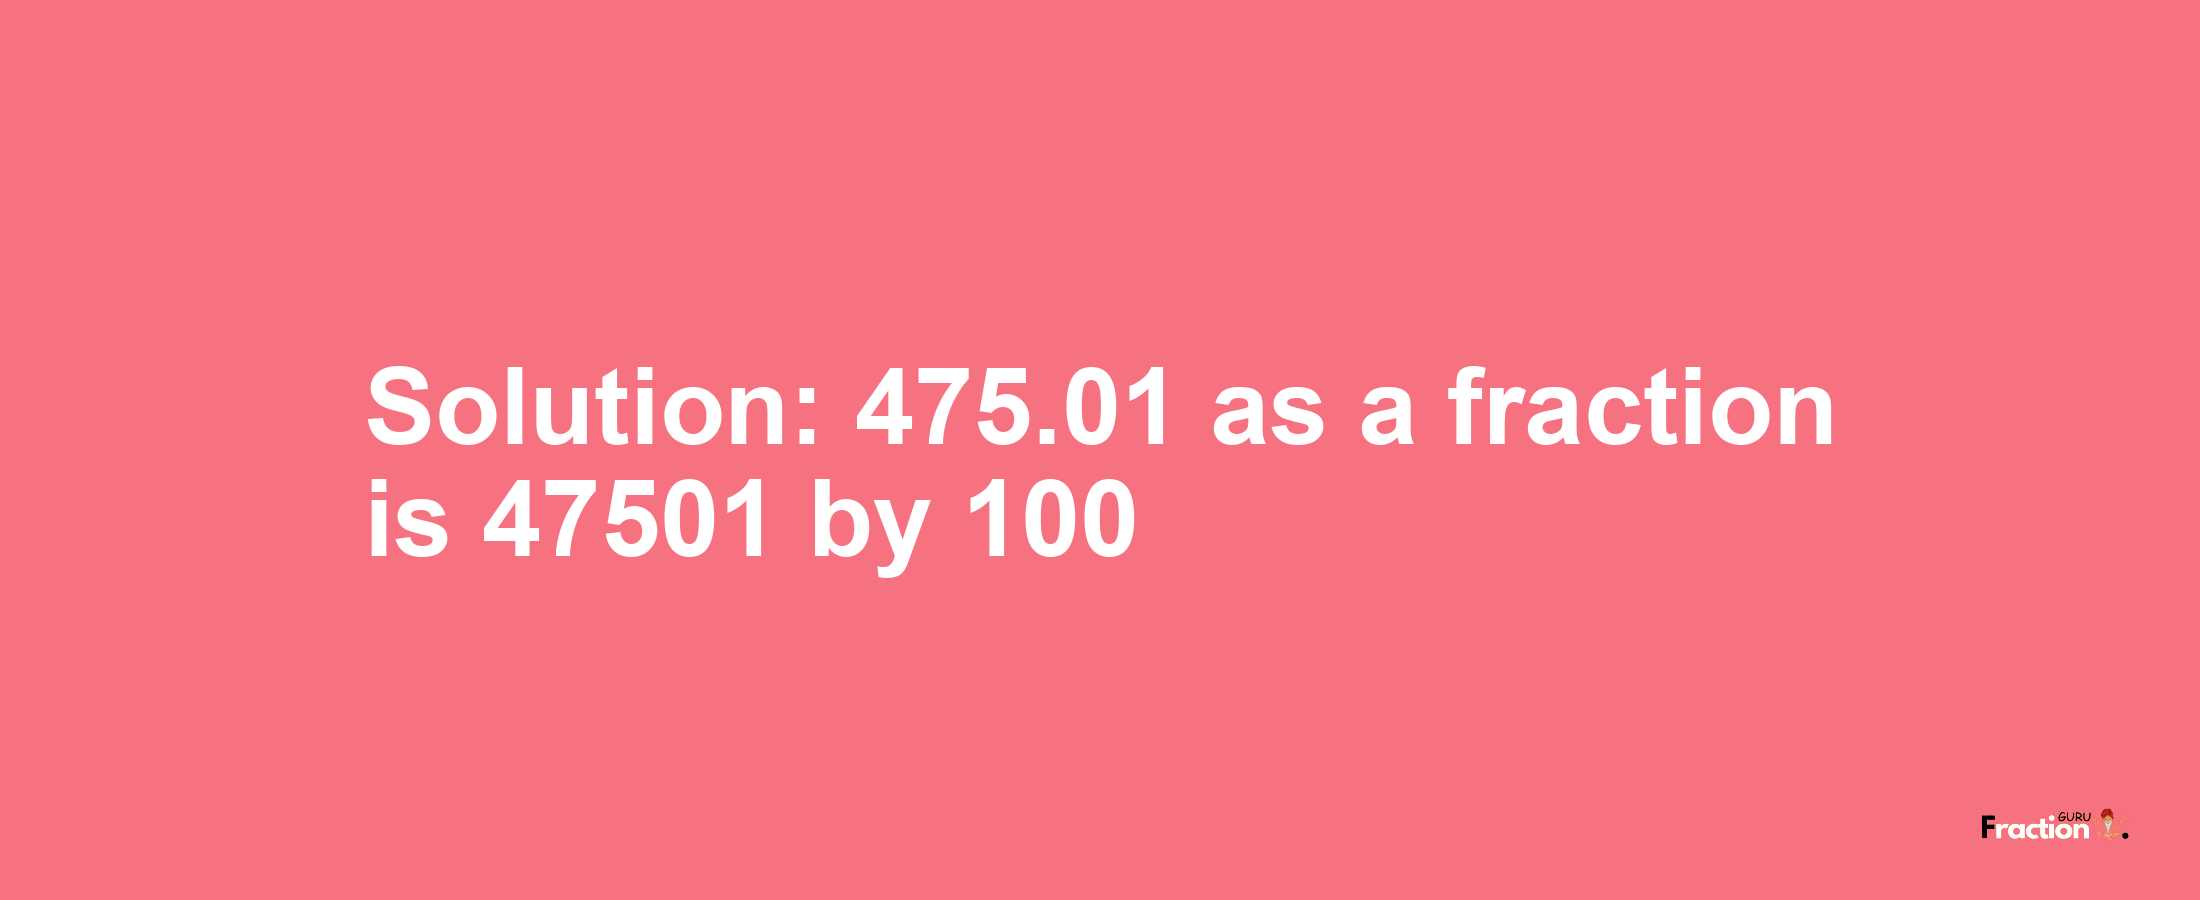 Solution:475.01 as a fraction is 47501/100